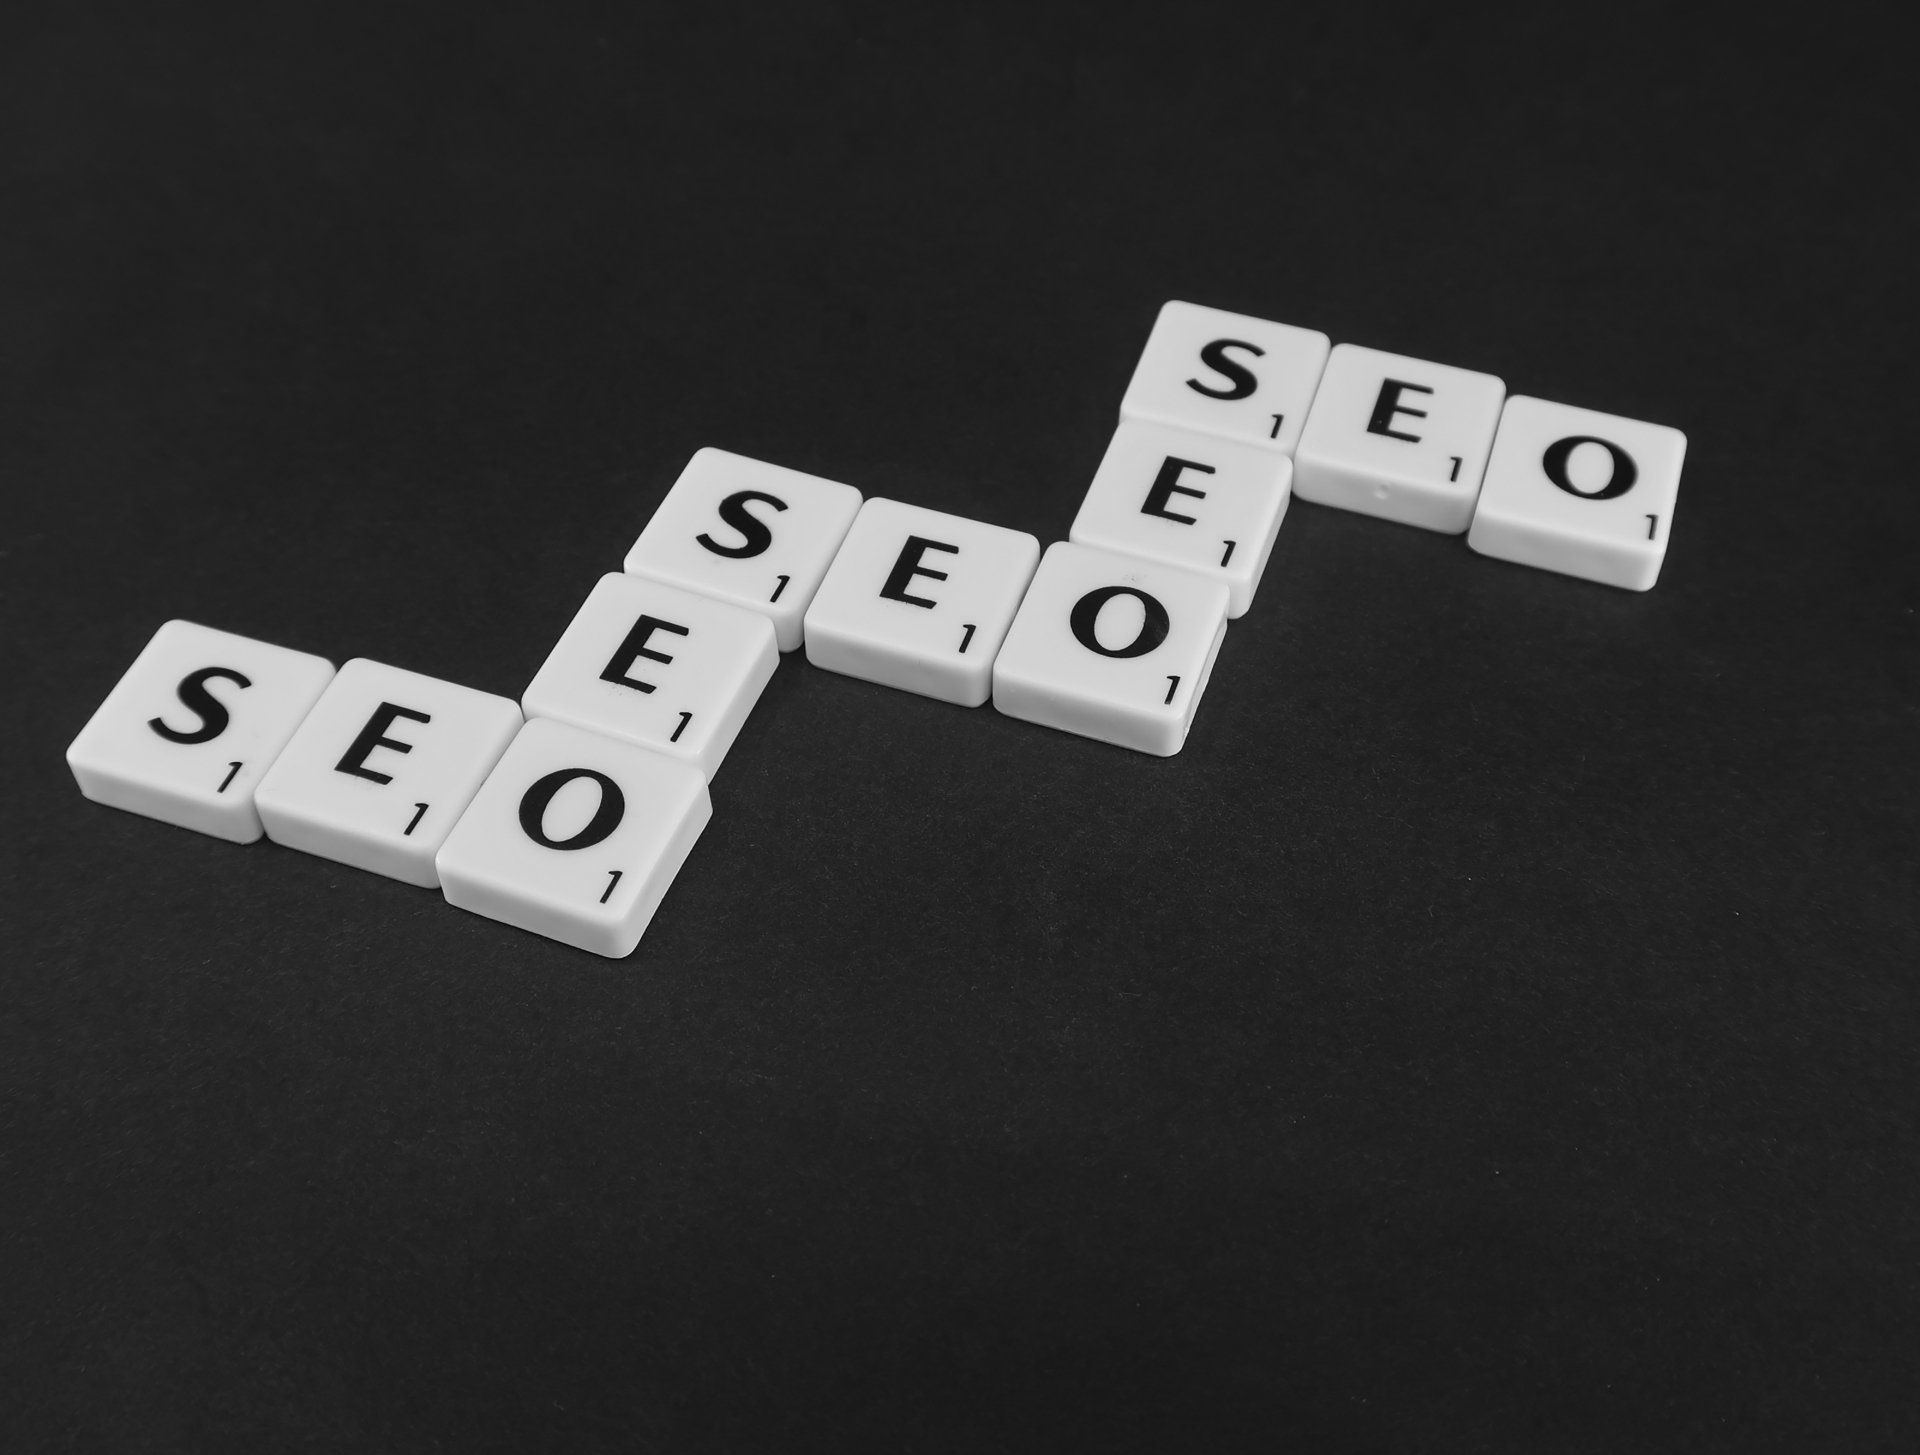 What Do Blogs Have to Do With SEO?